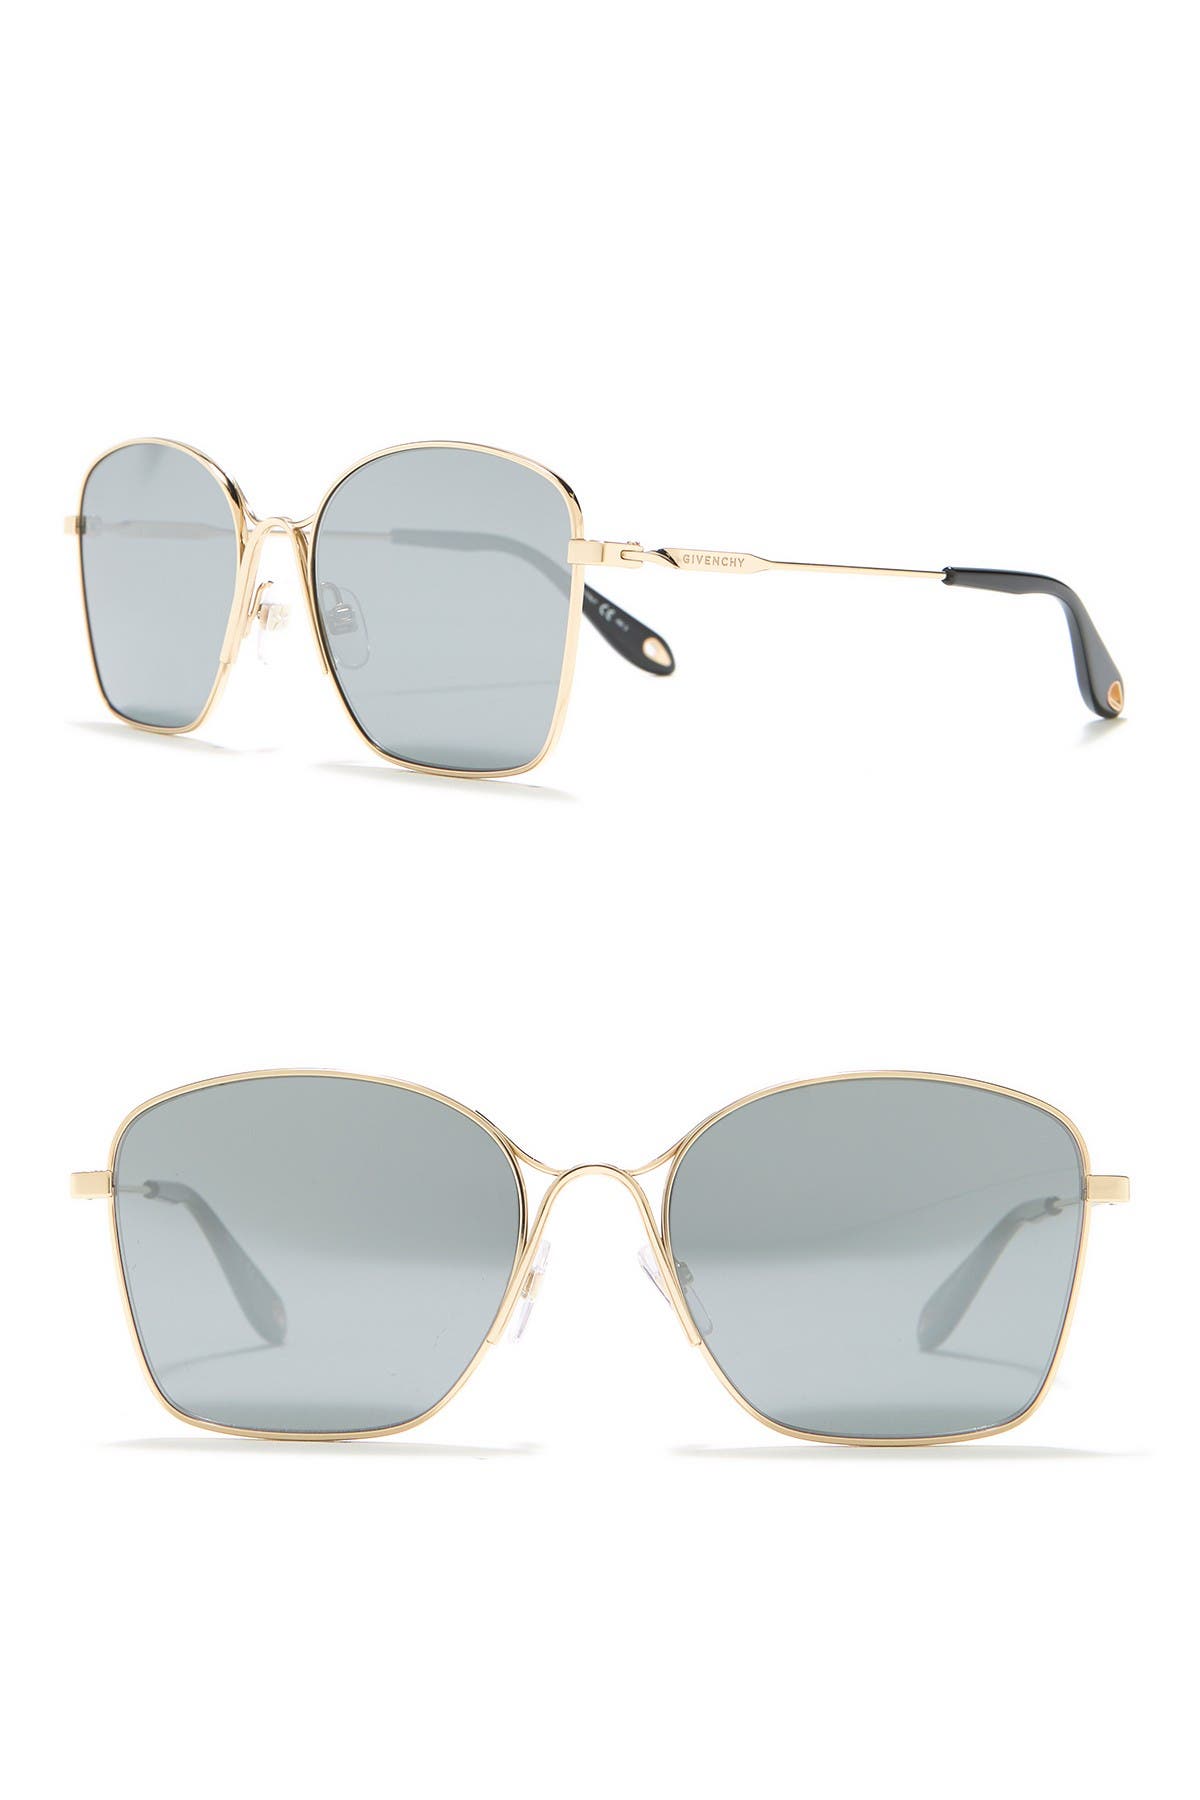 Givenchy | 56mm Square Sunglasses 